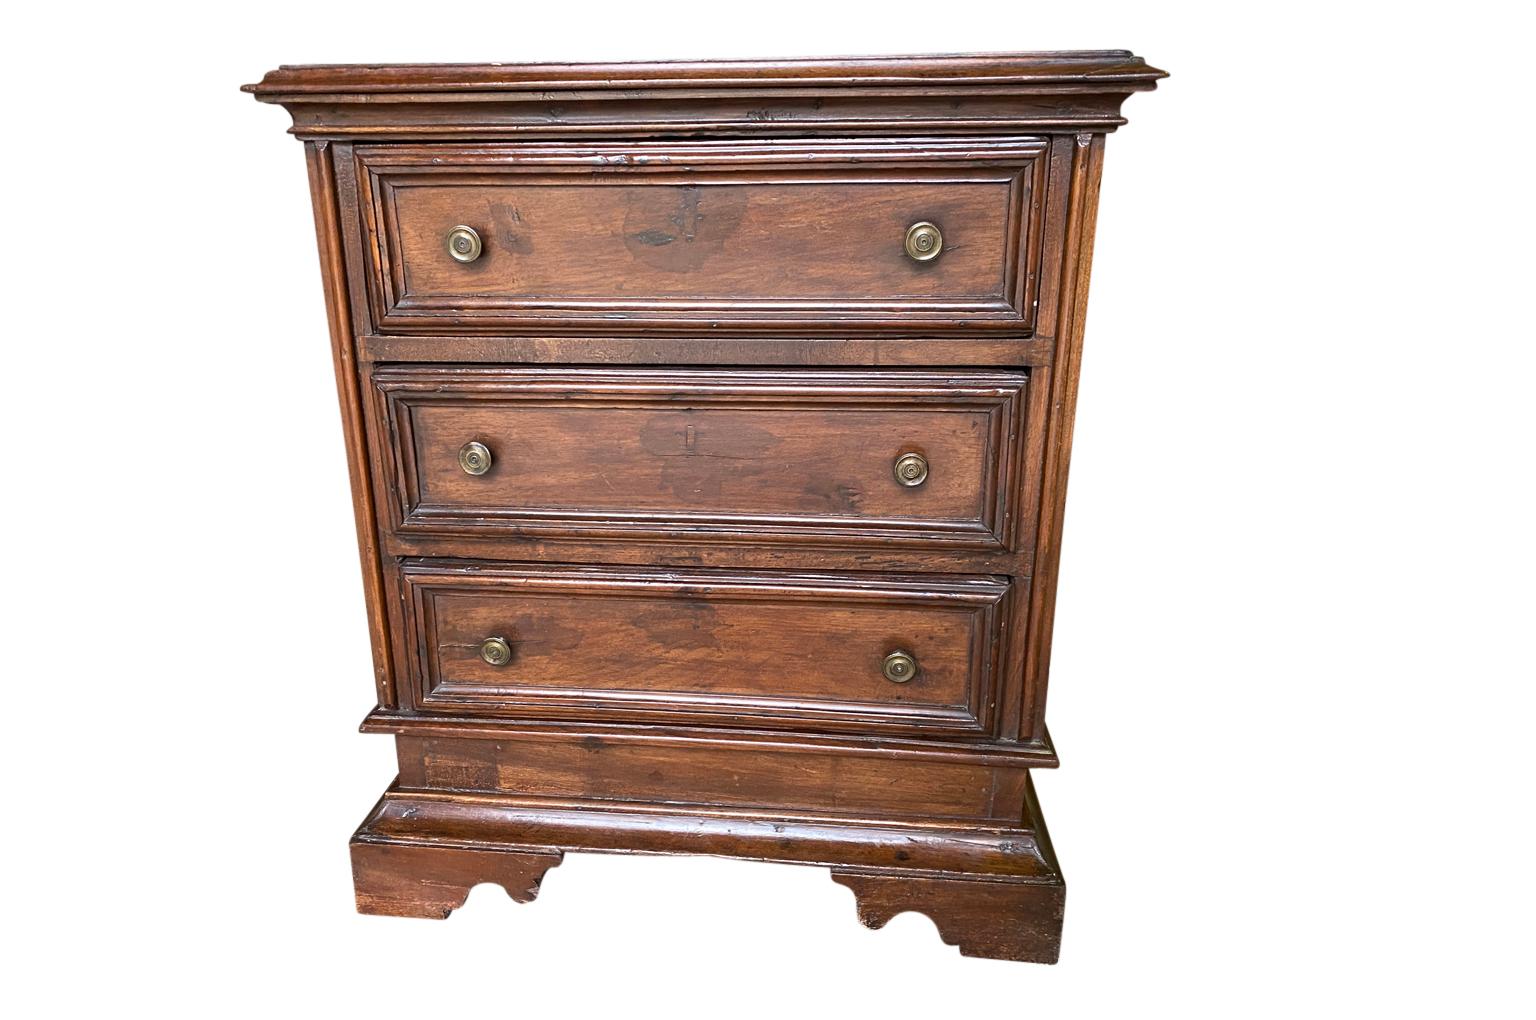 A very handsome 18th century Comodini from the Lombardy region of Italy. Soundly constructed from handsome walnut with a shaped top over three drawers resting on bracket feet.